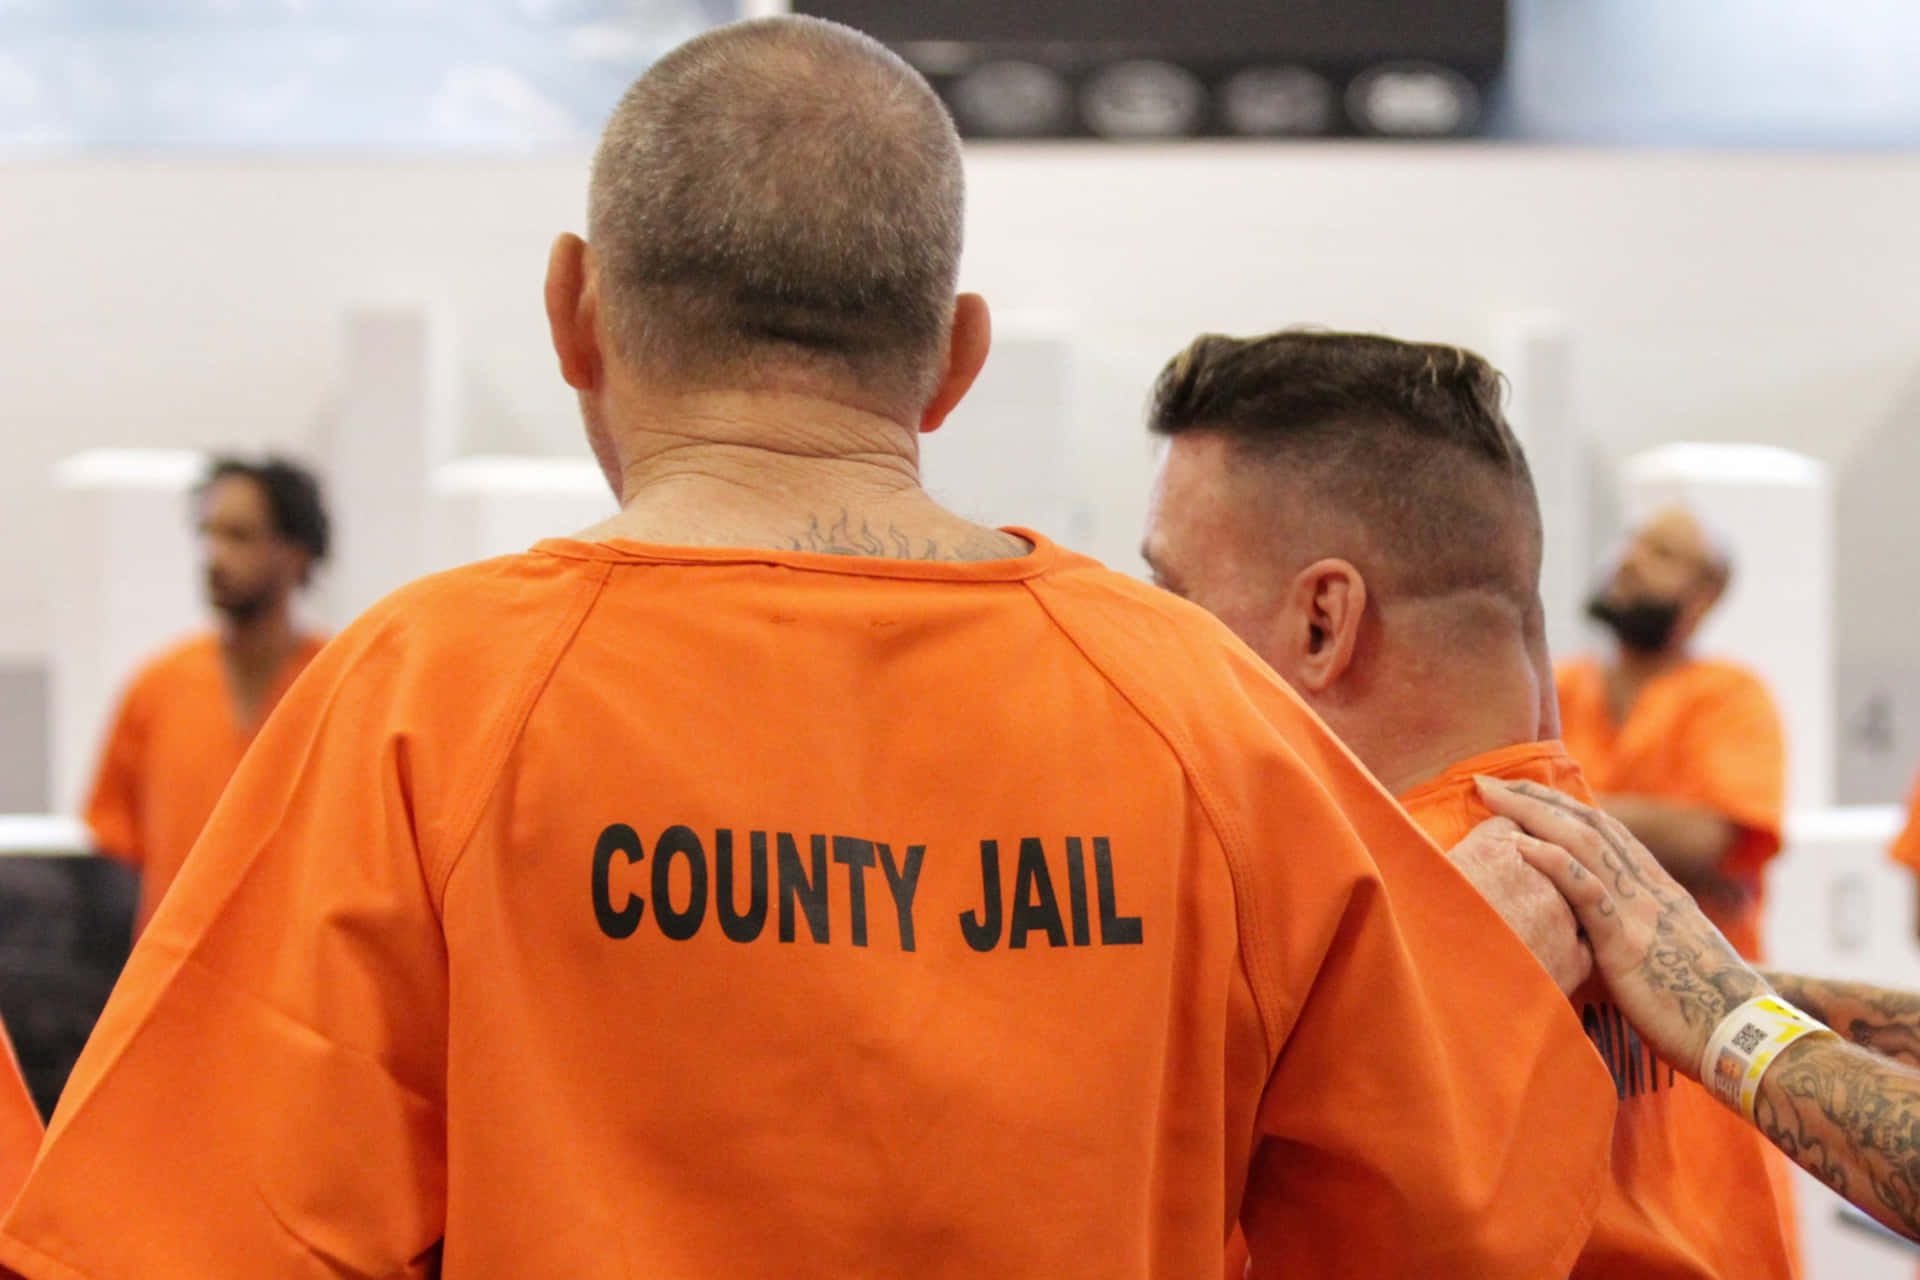 County Jail Orange Clothes Picture